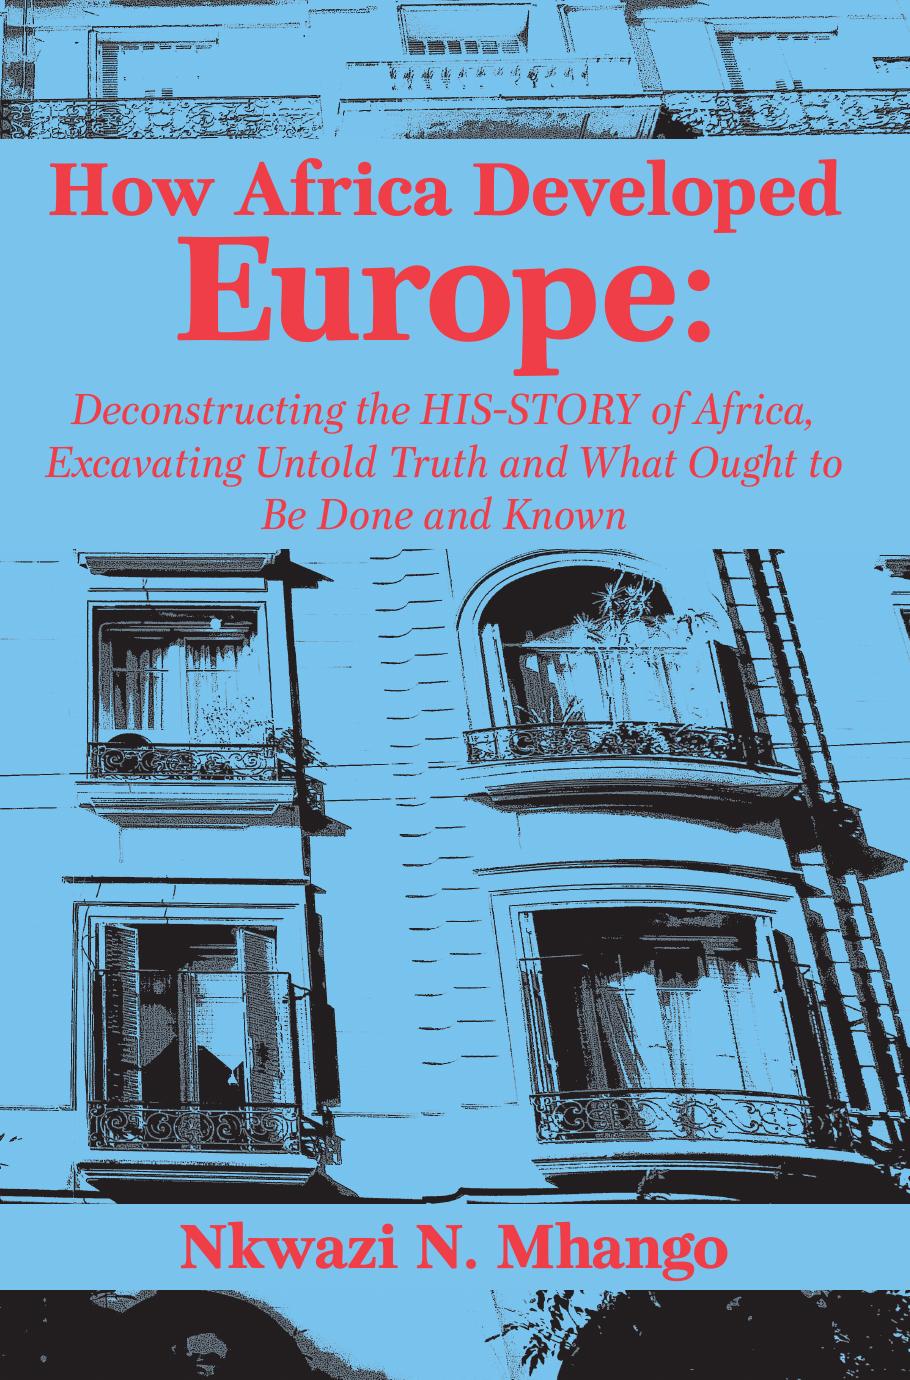 How Africa Developed Europe